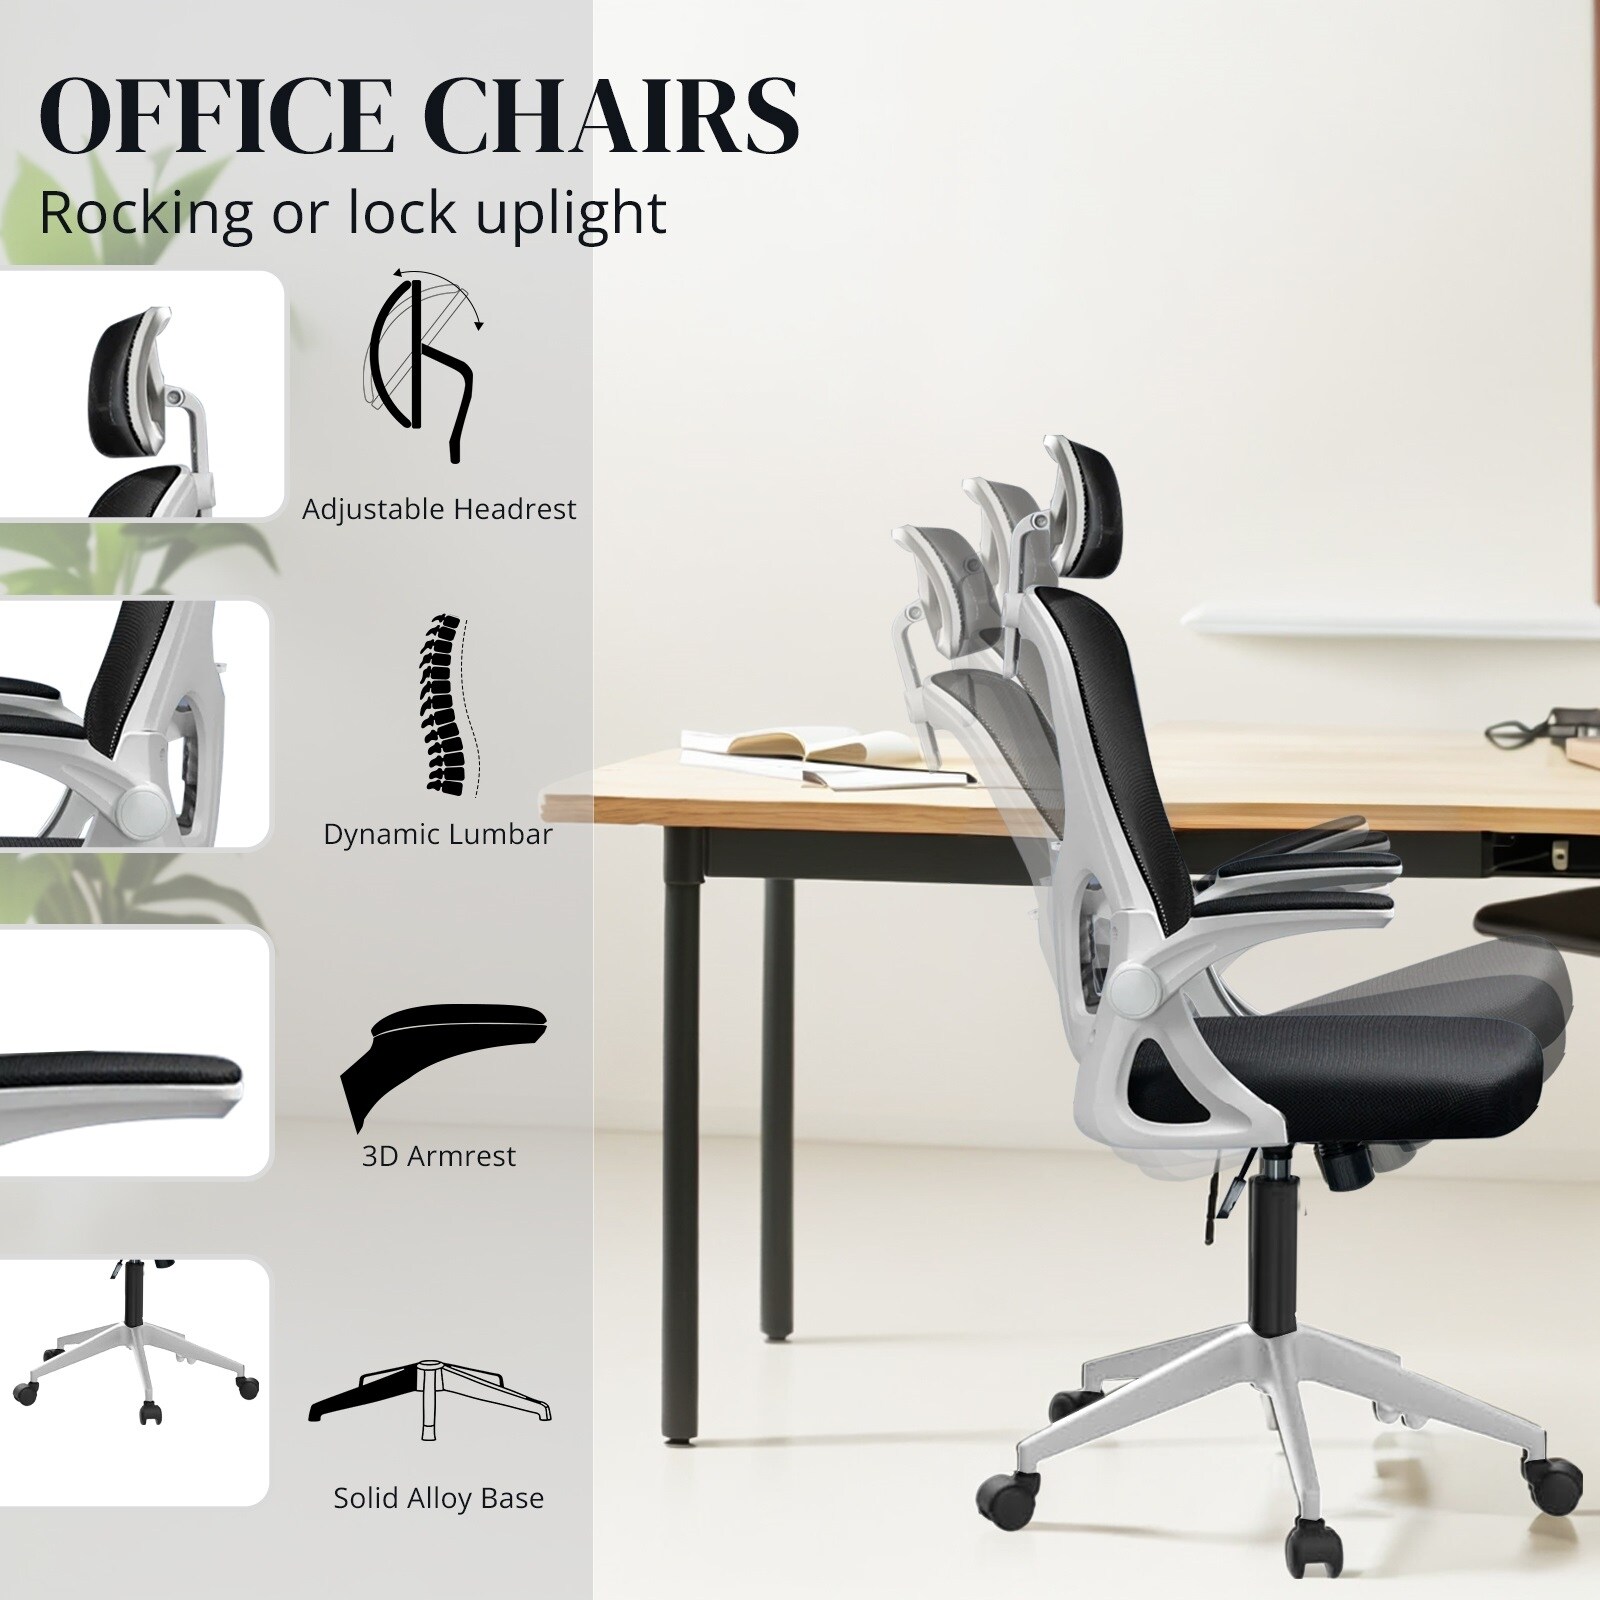 https://ak1.ostkcdn.com/images/products/is/images/direct/5c2419161e534207ac378047902d99a608db7075/Office-Chair%2C-Ergonomic-Desk-Chair%2C-High-Back-Faux-Leather-Task-Chairs-for-Home-Office-for-Adult-Working-Study.jpg